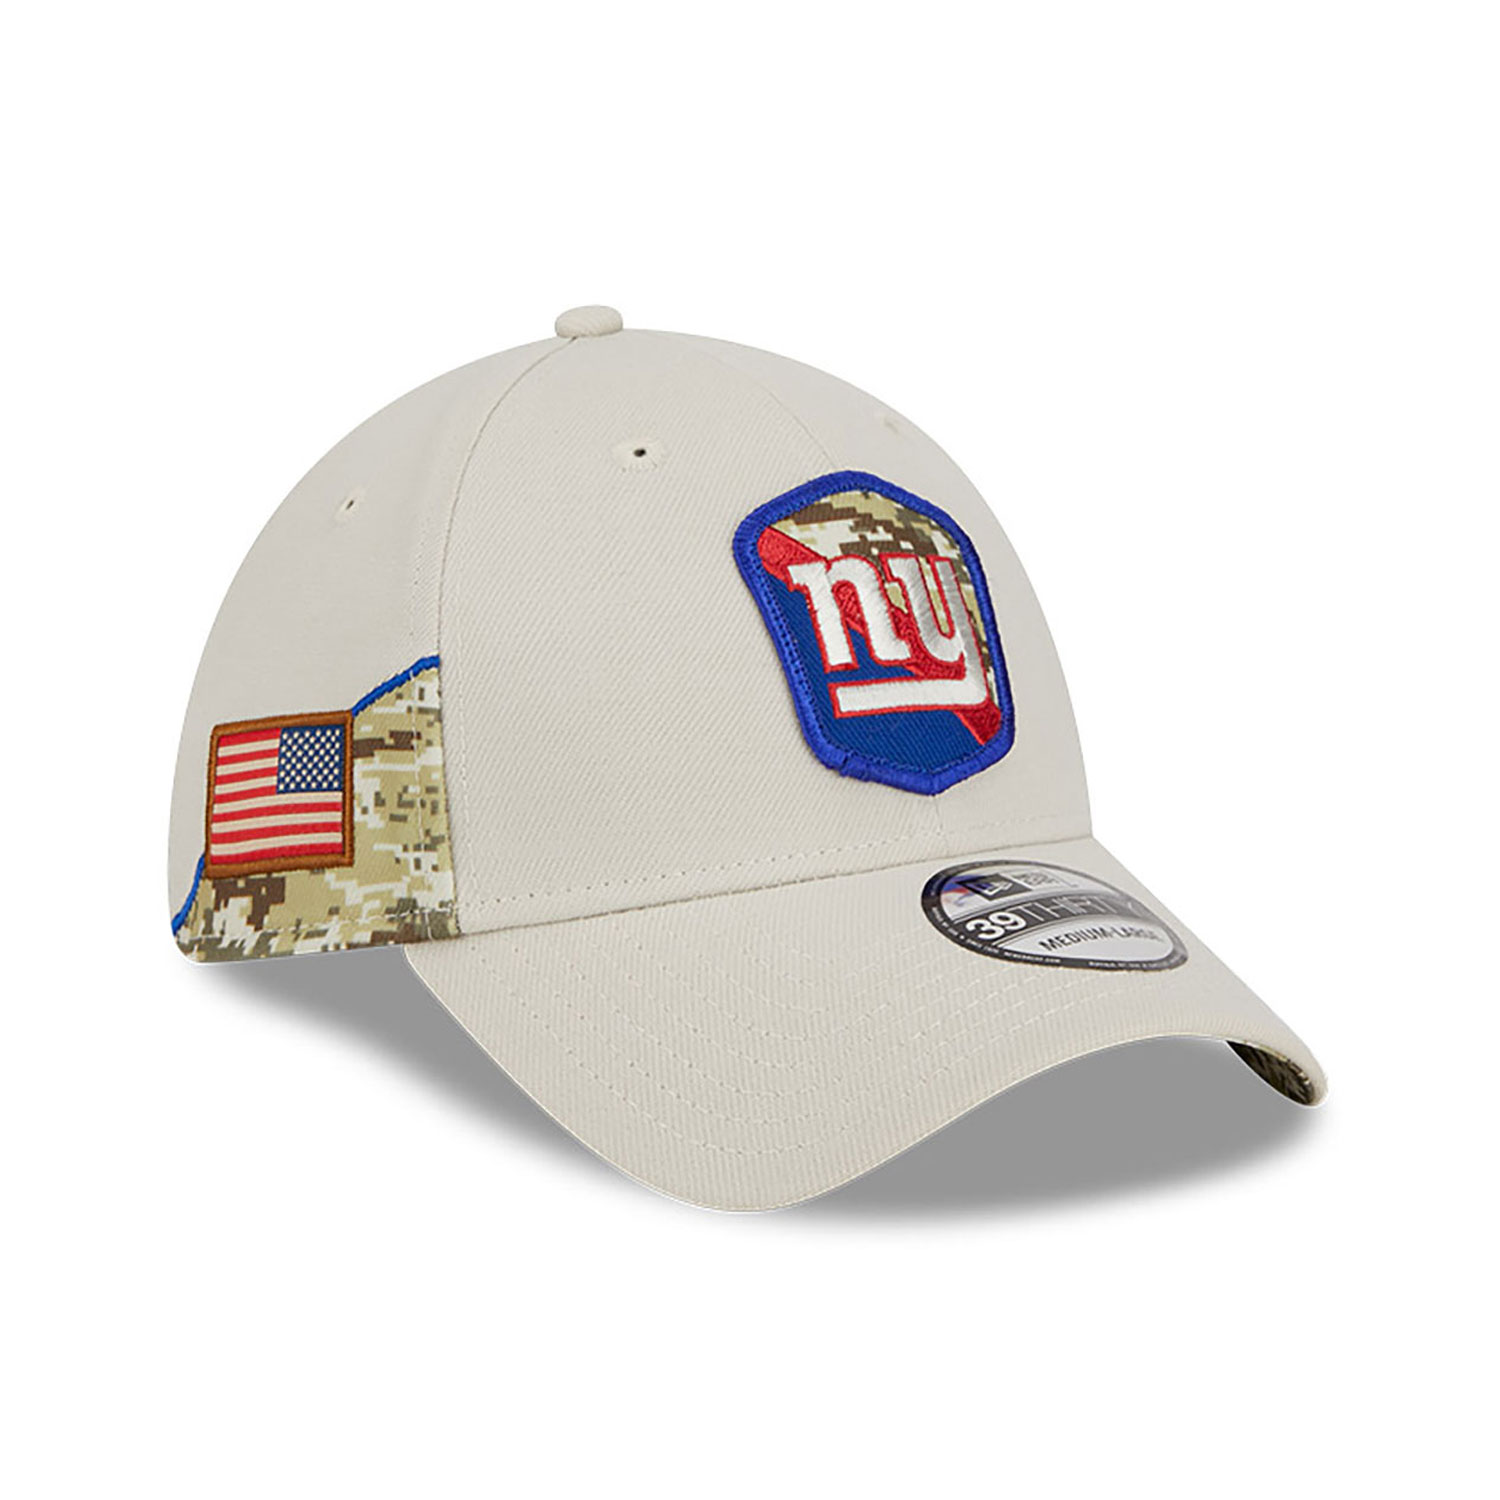 NFL Salute To Service New York Giants 39THIRTY Stretch Fit Cap